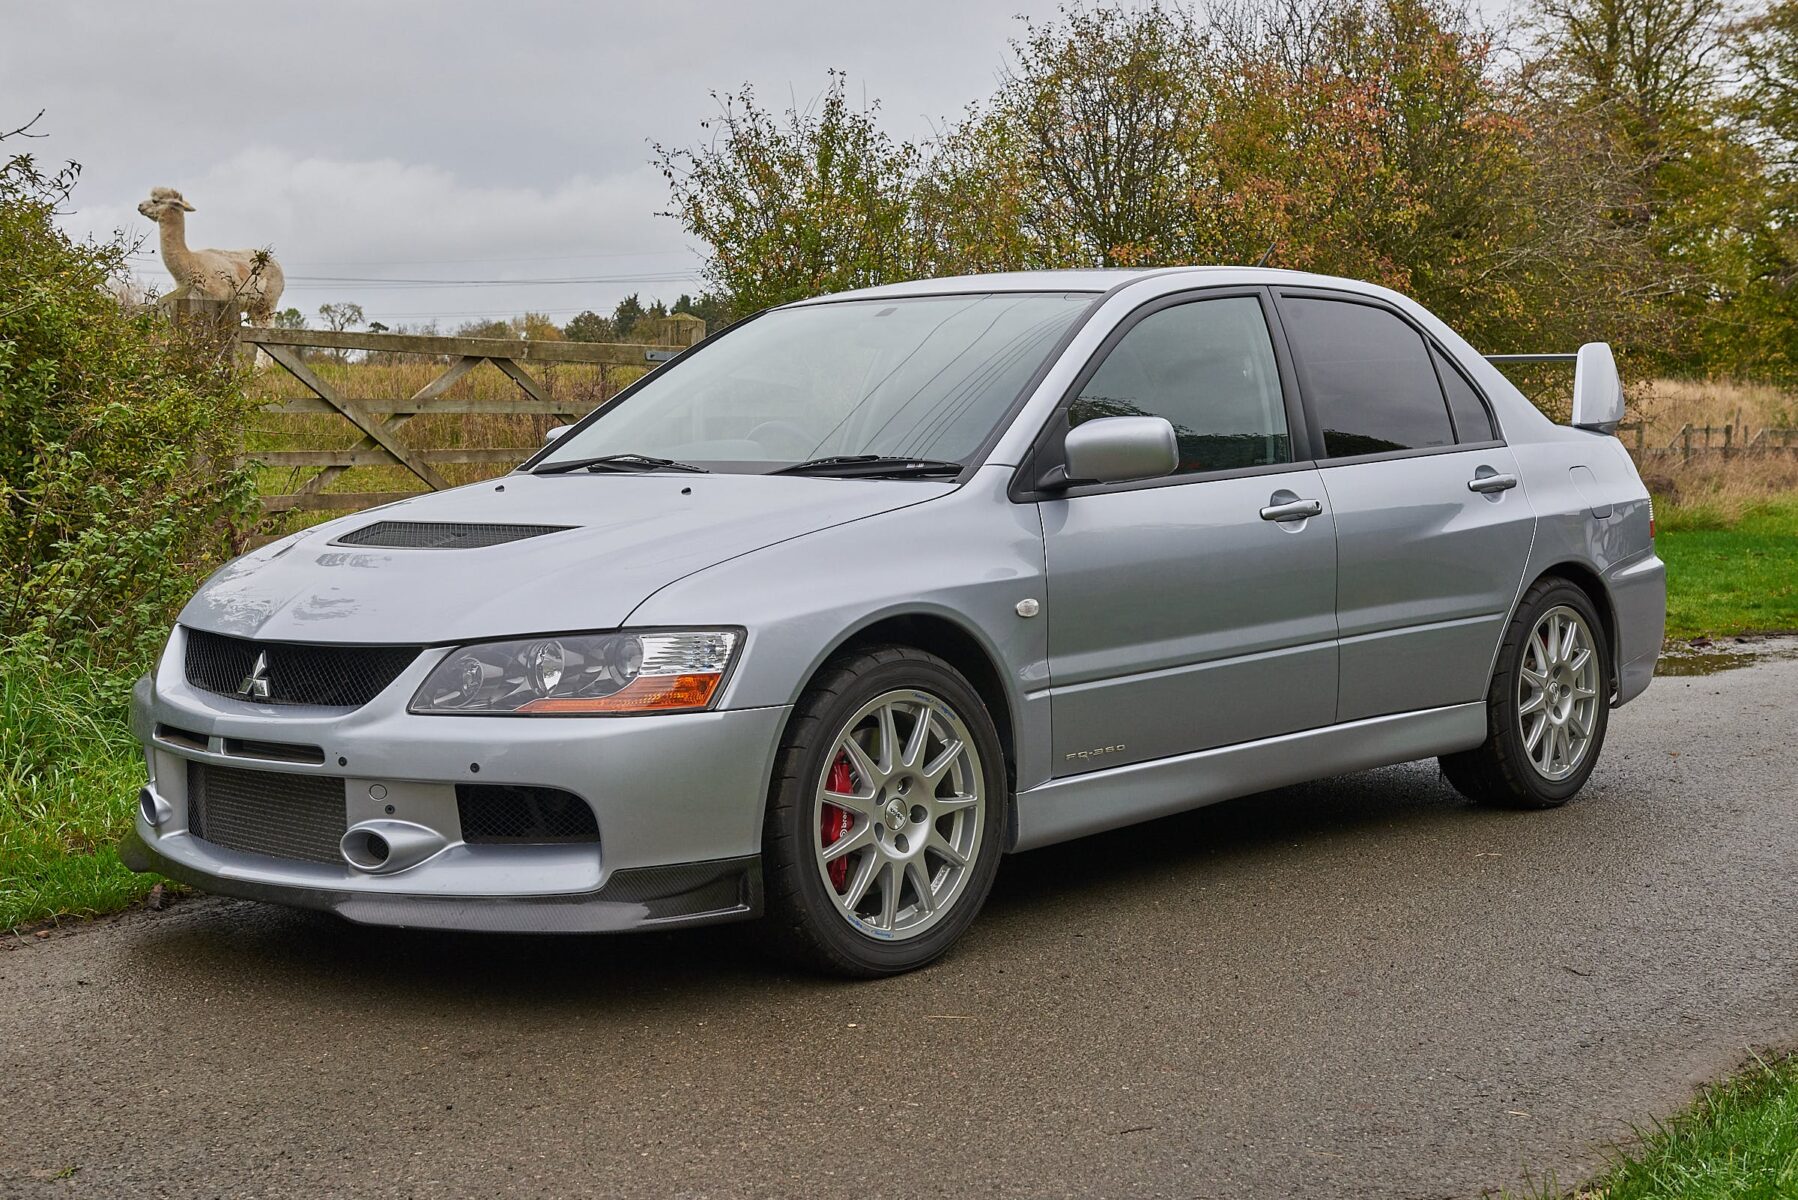 2007 Mitsubishi Lancer Evolution Ix Mr Fq 360 By Hks Auction Car Of The Week Car And Classic 1346